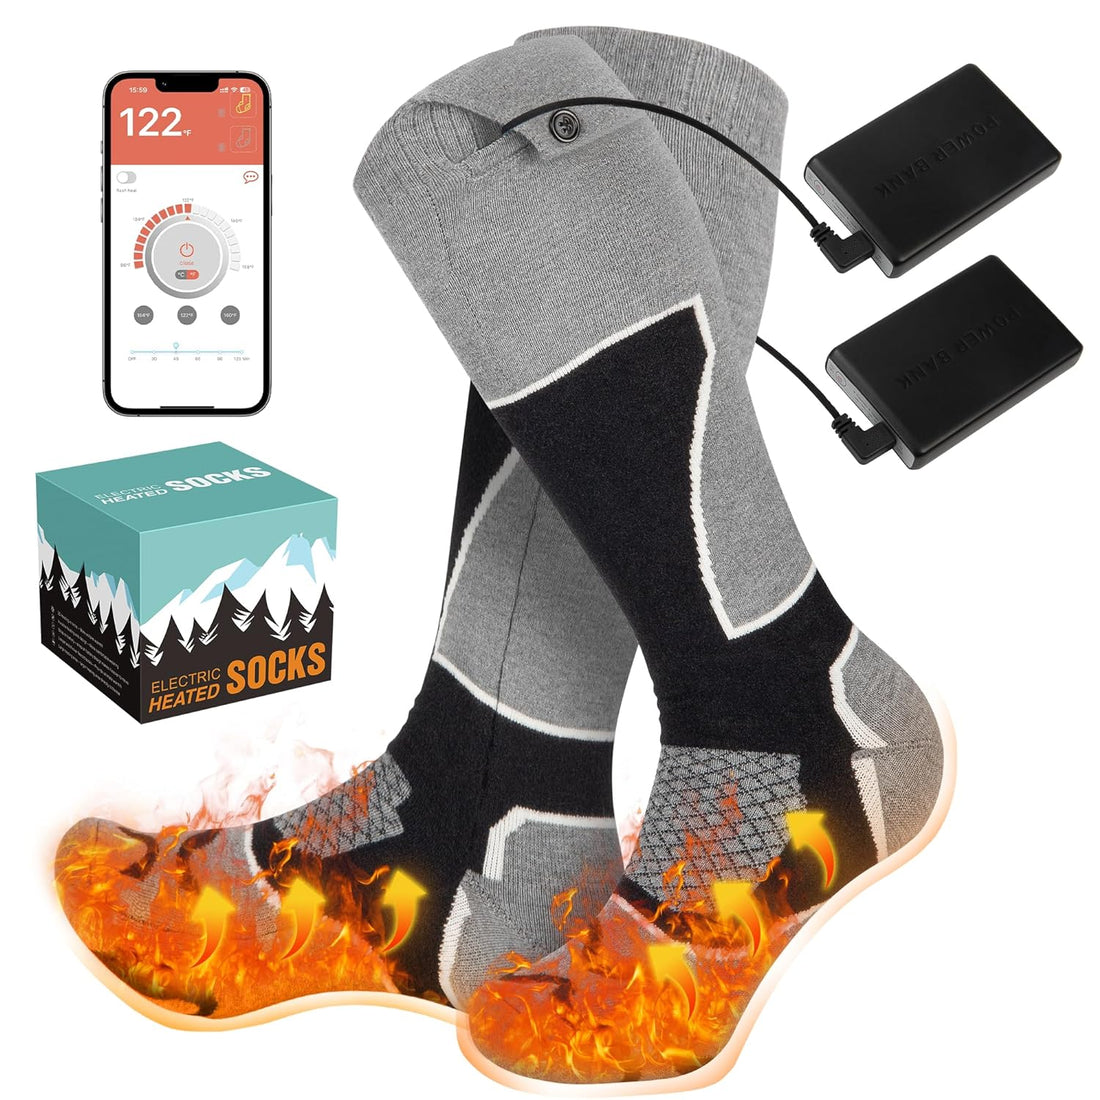 untovei Heated Socks, 2023 Upgraded Electric Heated Socks for Men Women, Rechargeable 5000mAH Battery Heated Winter Thermal Socks with APP Remote, Washable Foot Warmers Skiing Climbing Outdoor Socks